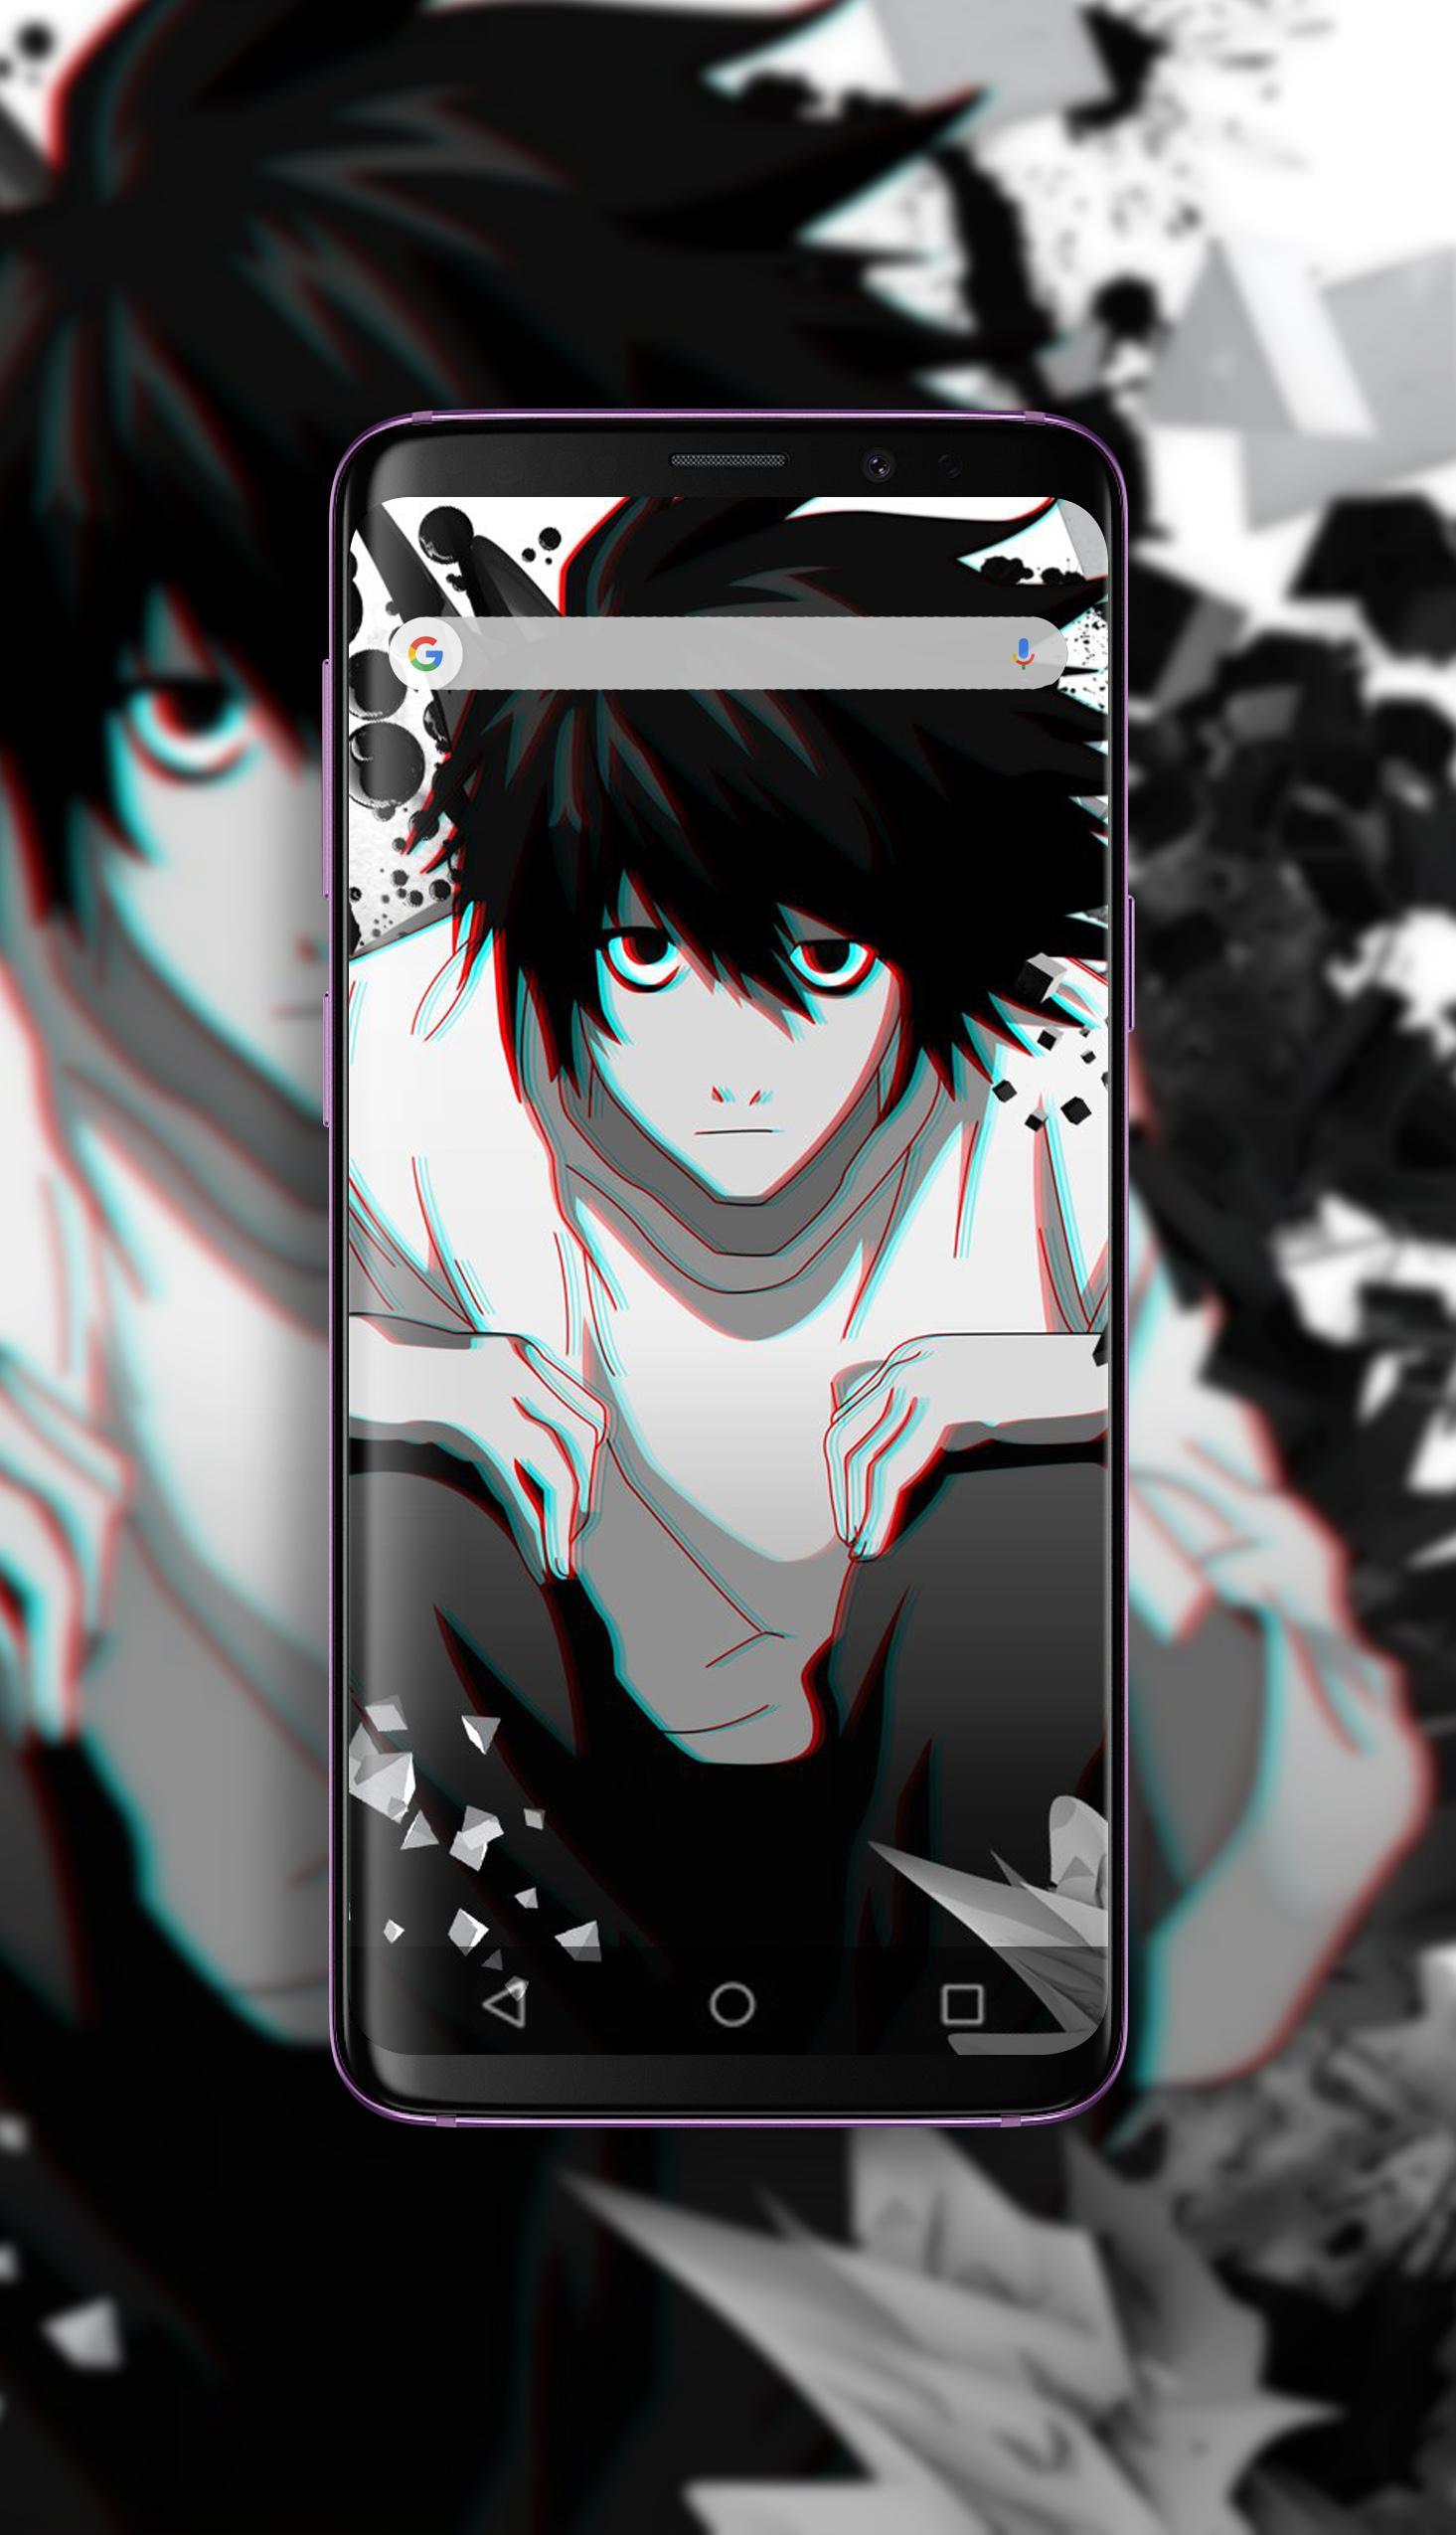 Ryuzaki Lawiet L Wallpapers Hd For Android Apk Download Feel free to download, share, comment and discuss every wallpaper you like. ryuzaki lawiet l wallpapers hd for